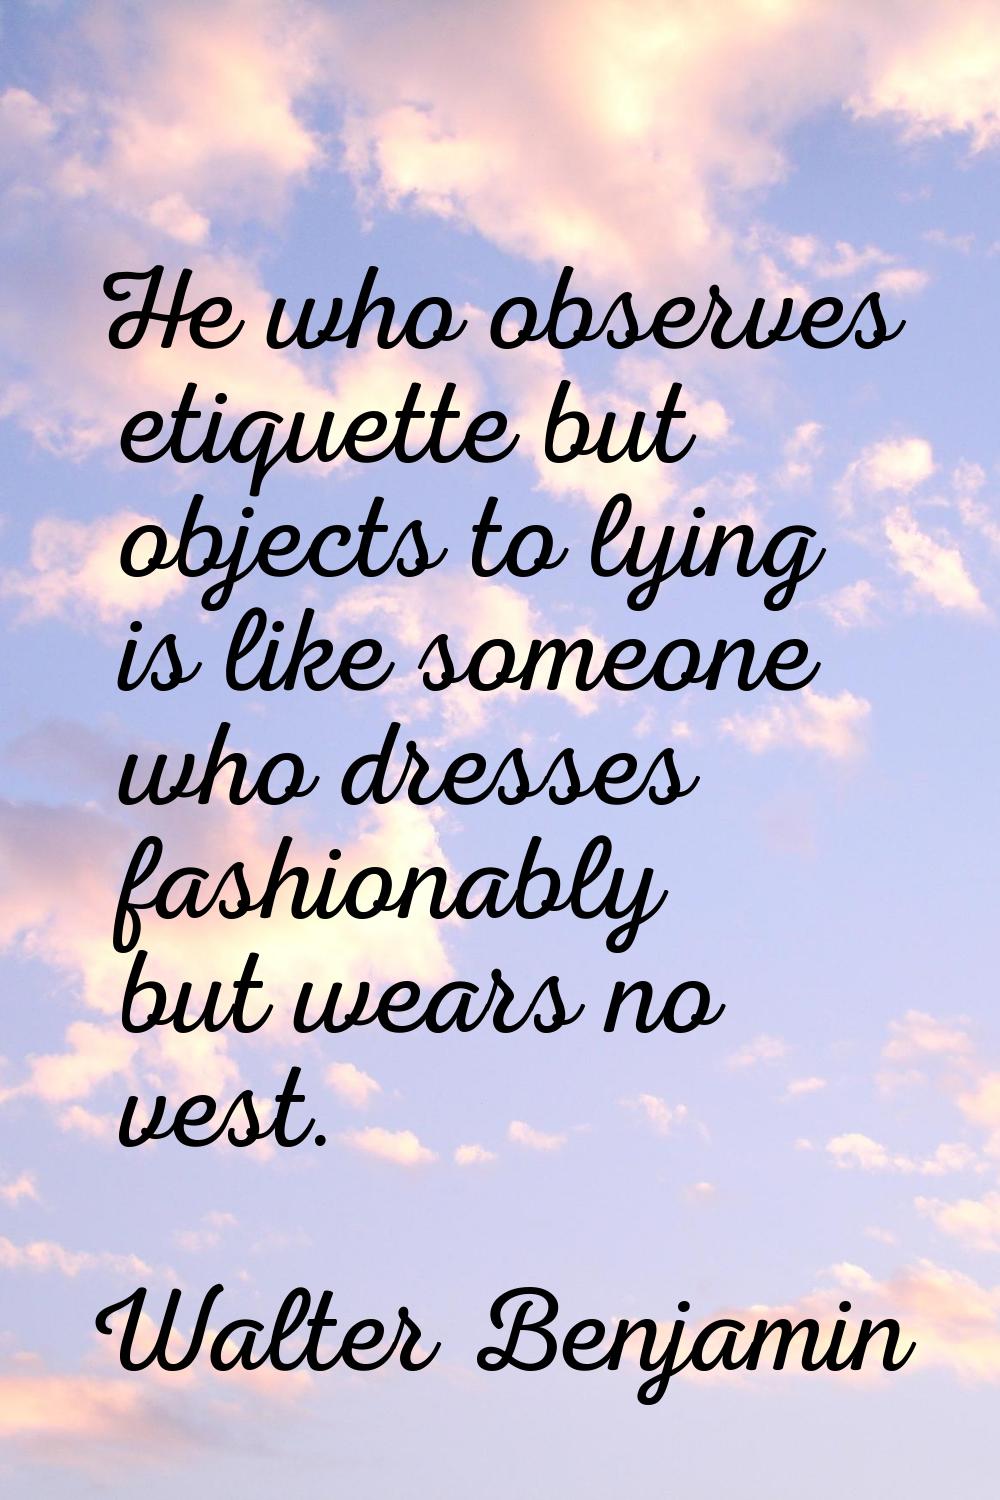 He who observes etiquette but objects to lying is like someone who dresses fashionably but wears no